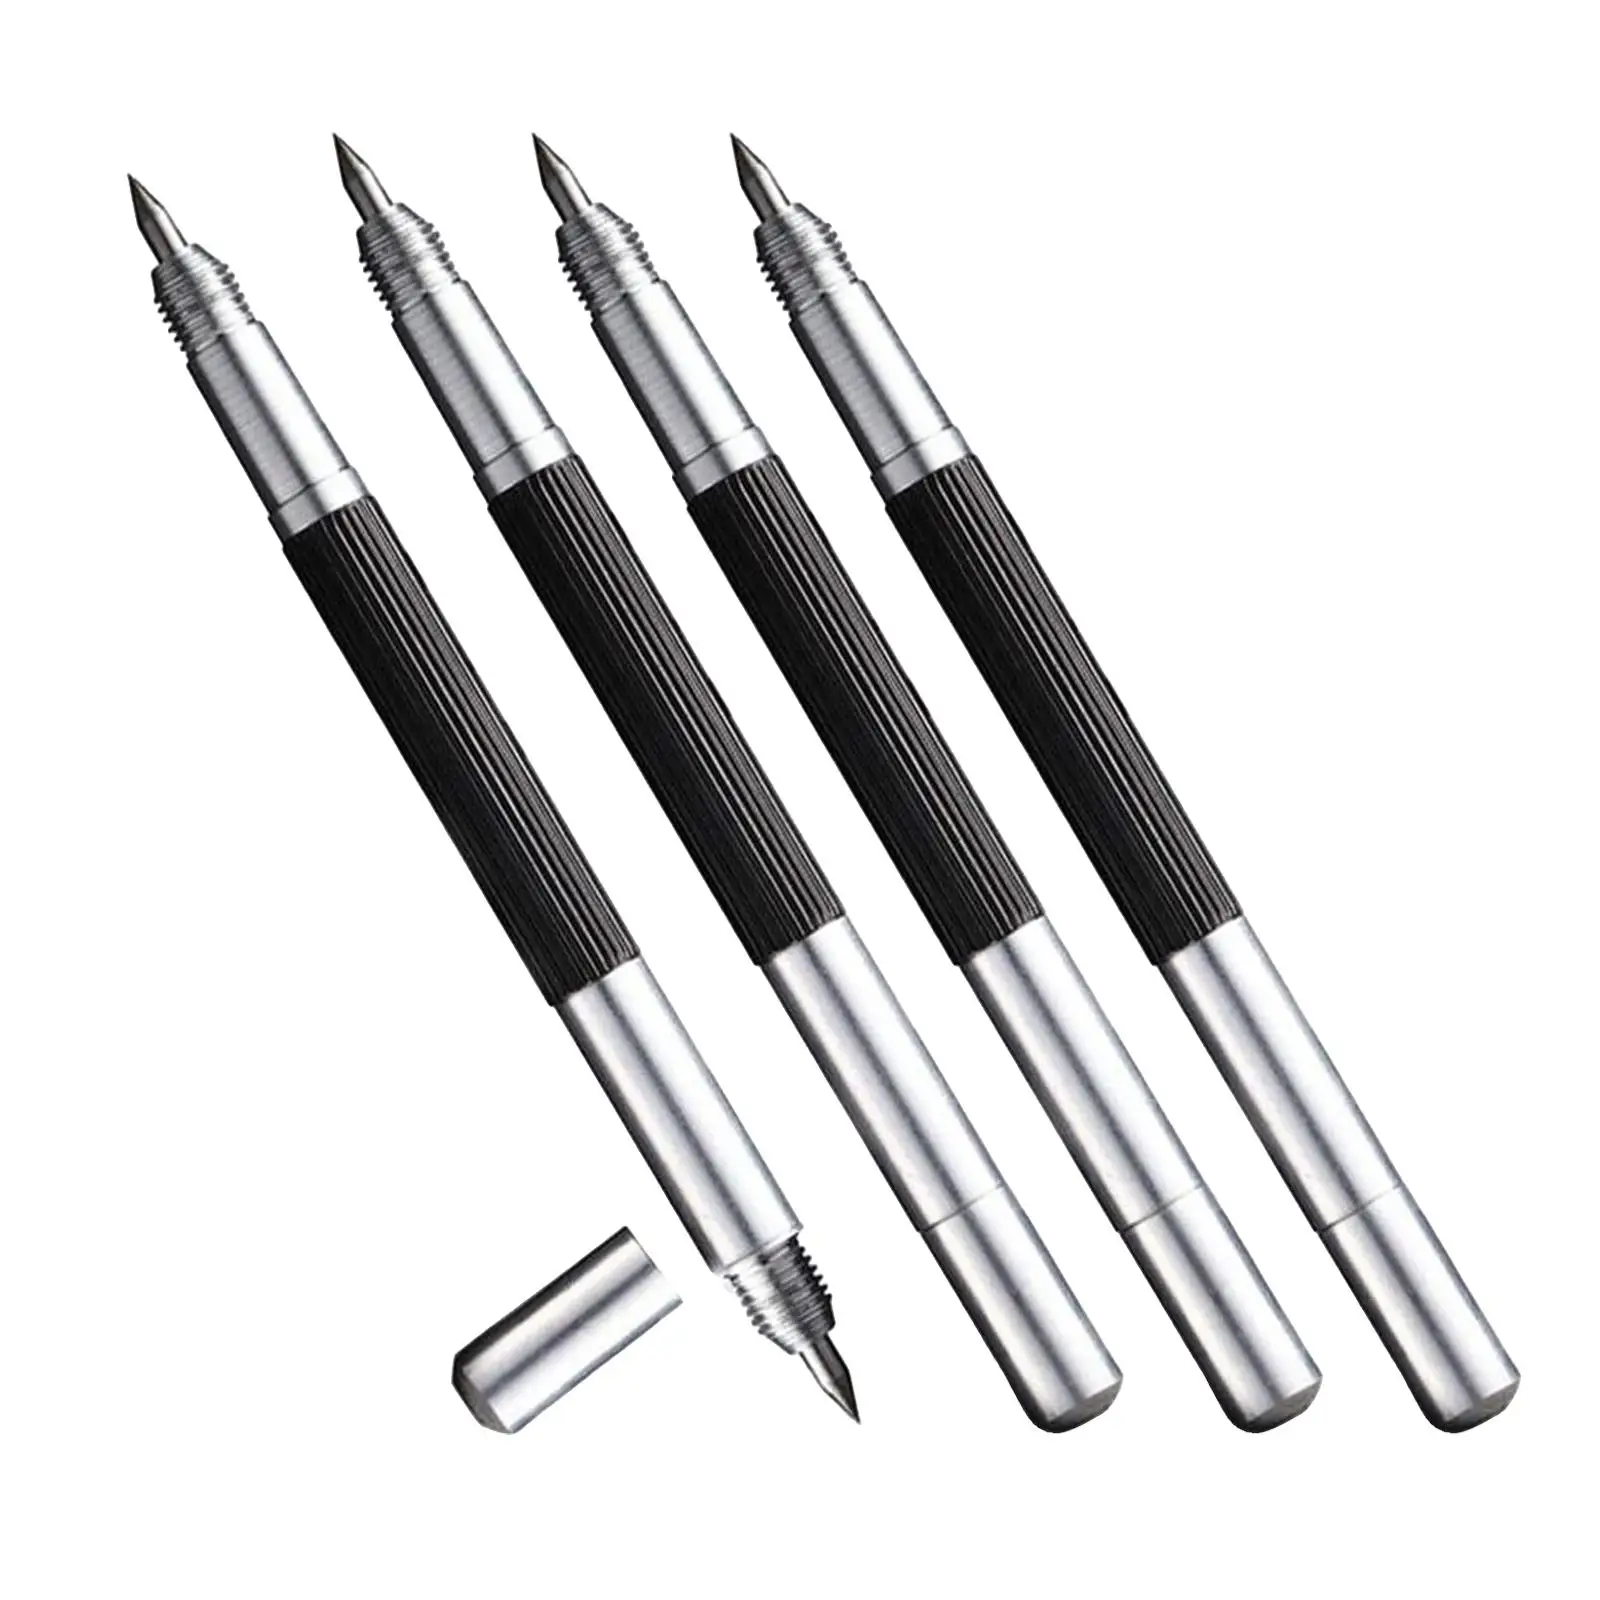 4x Portable Tungsten Carbide Tip Scriber Lettering Pen Cutting Stainless Steel Engraver Tile Cutter Engraving Pen Glass